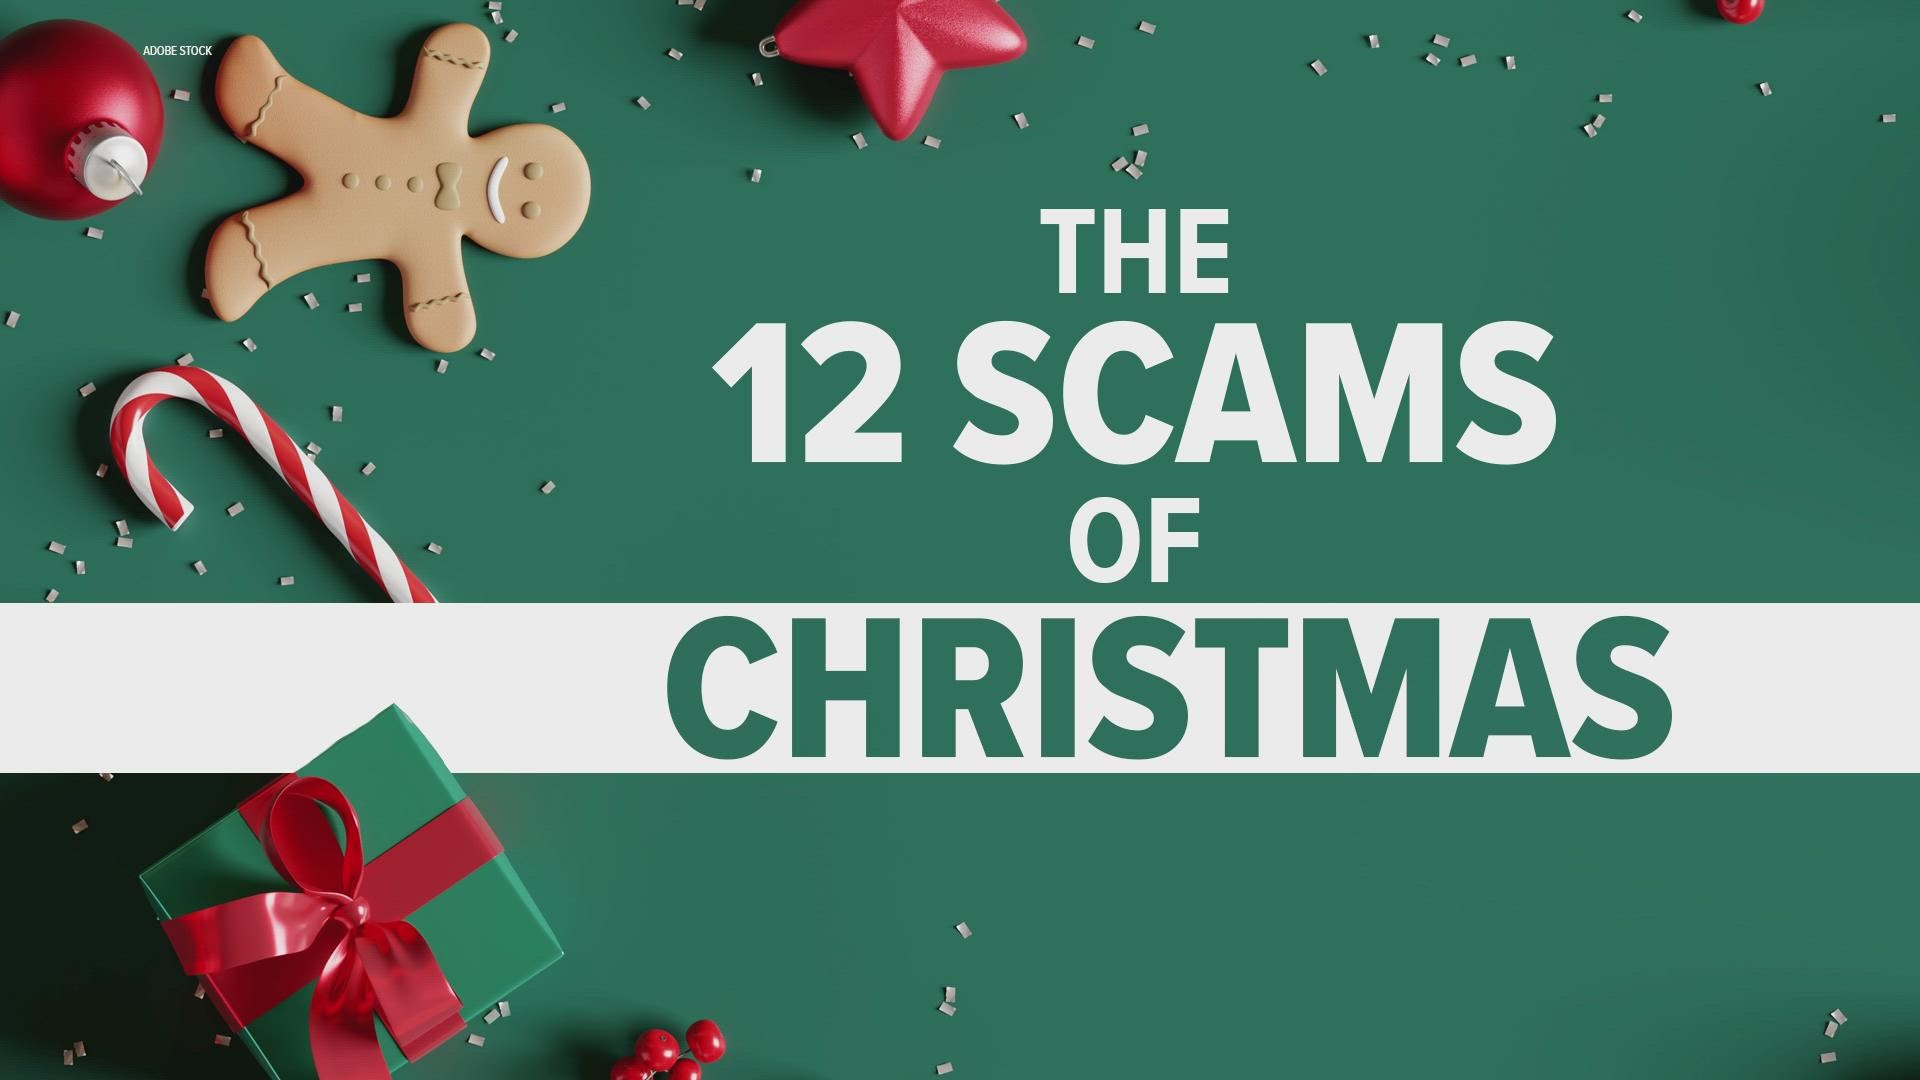 Be on the lookout for these potential scams around the holidays.